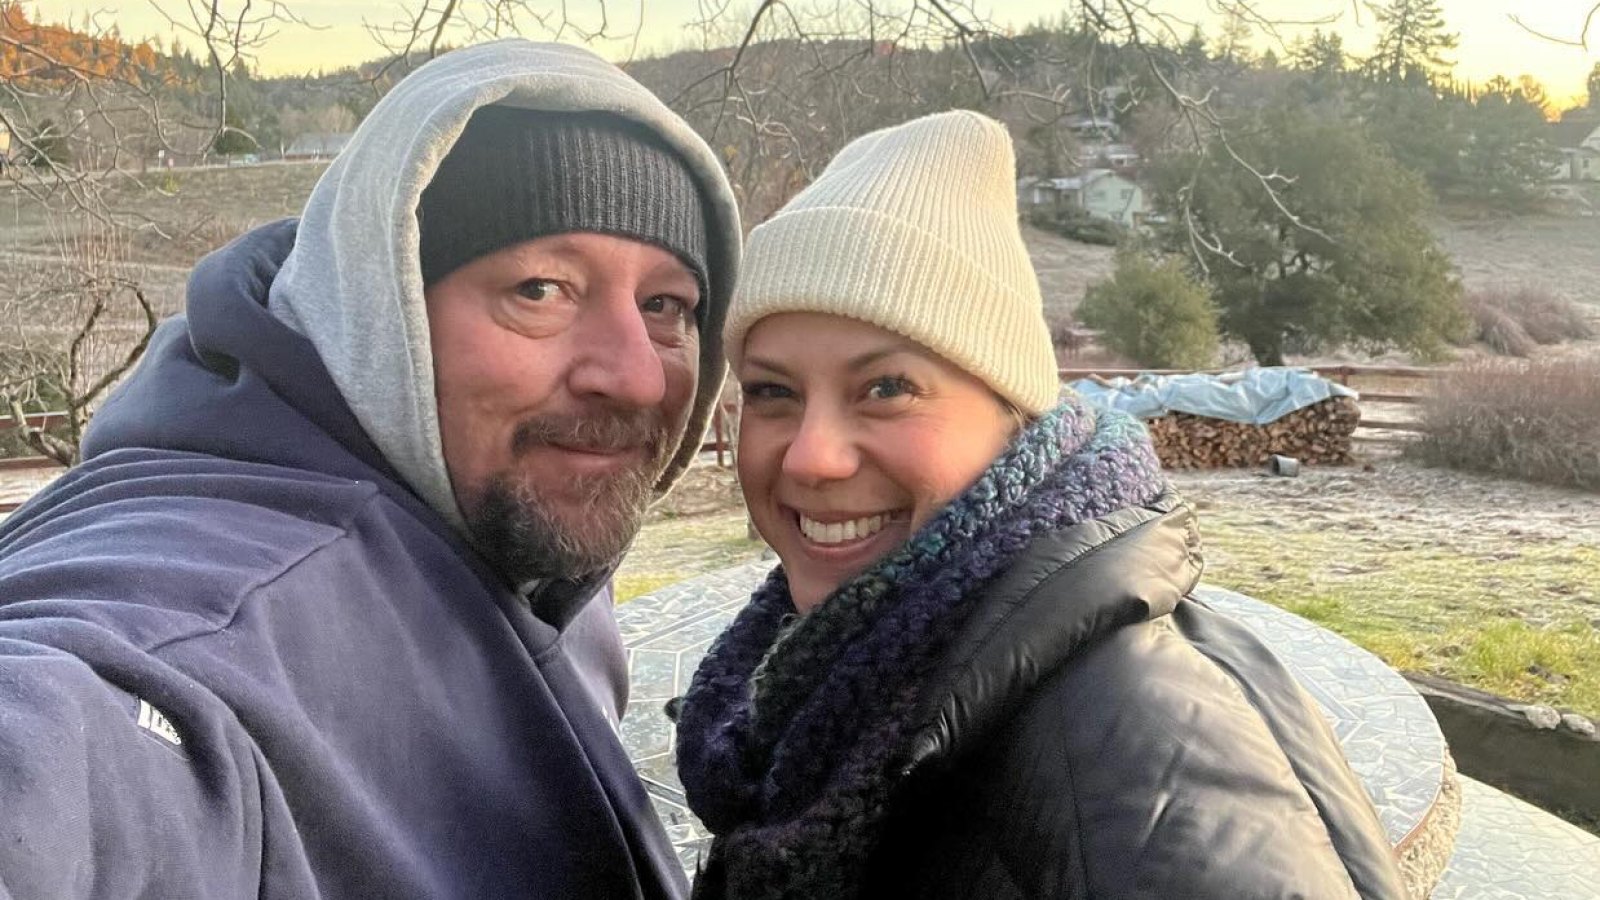 Jodie Sweetin s Husband Gushes Over Her Adventurous Spirit in BDay Tribute